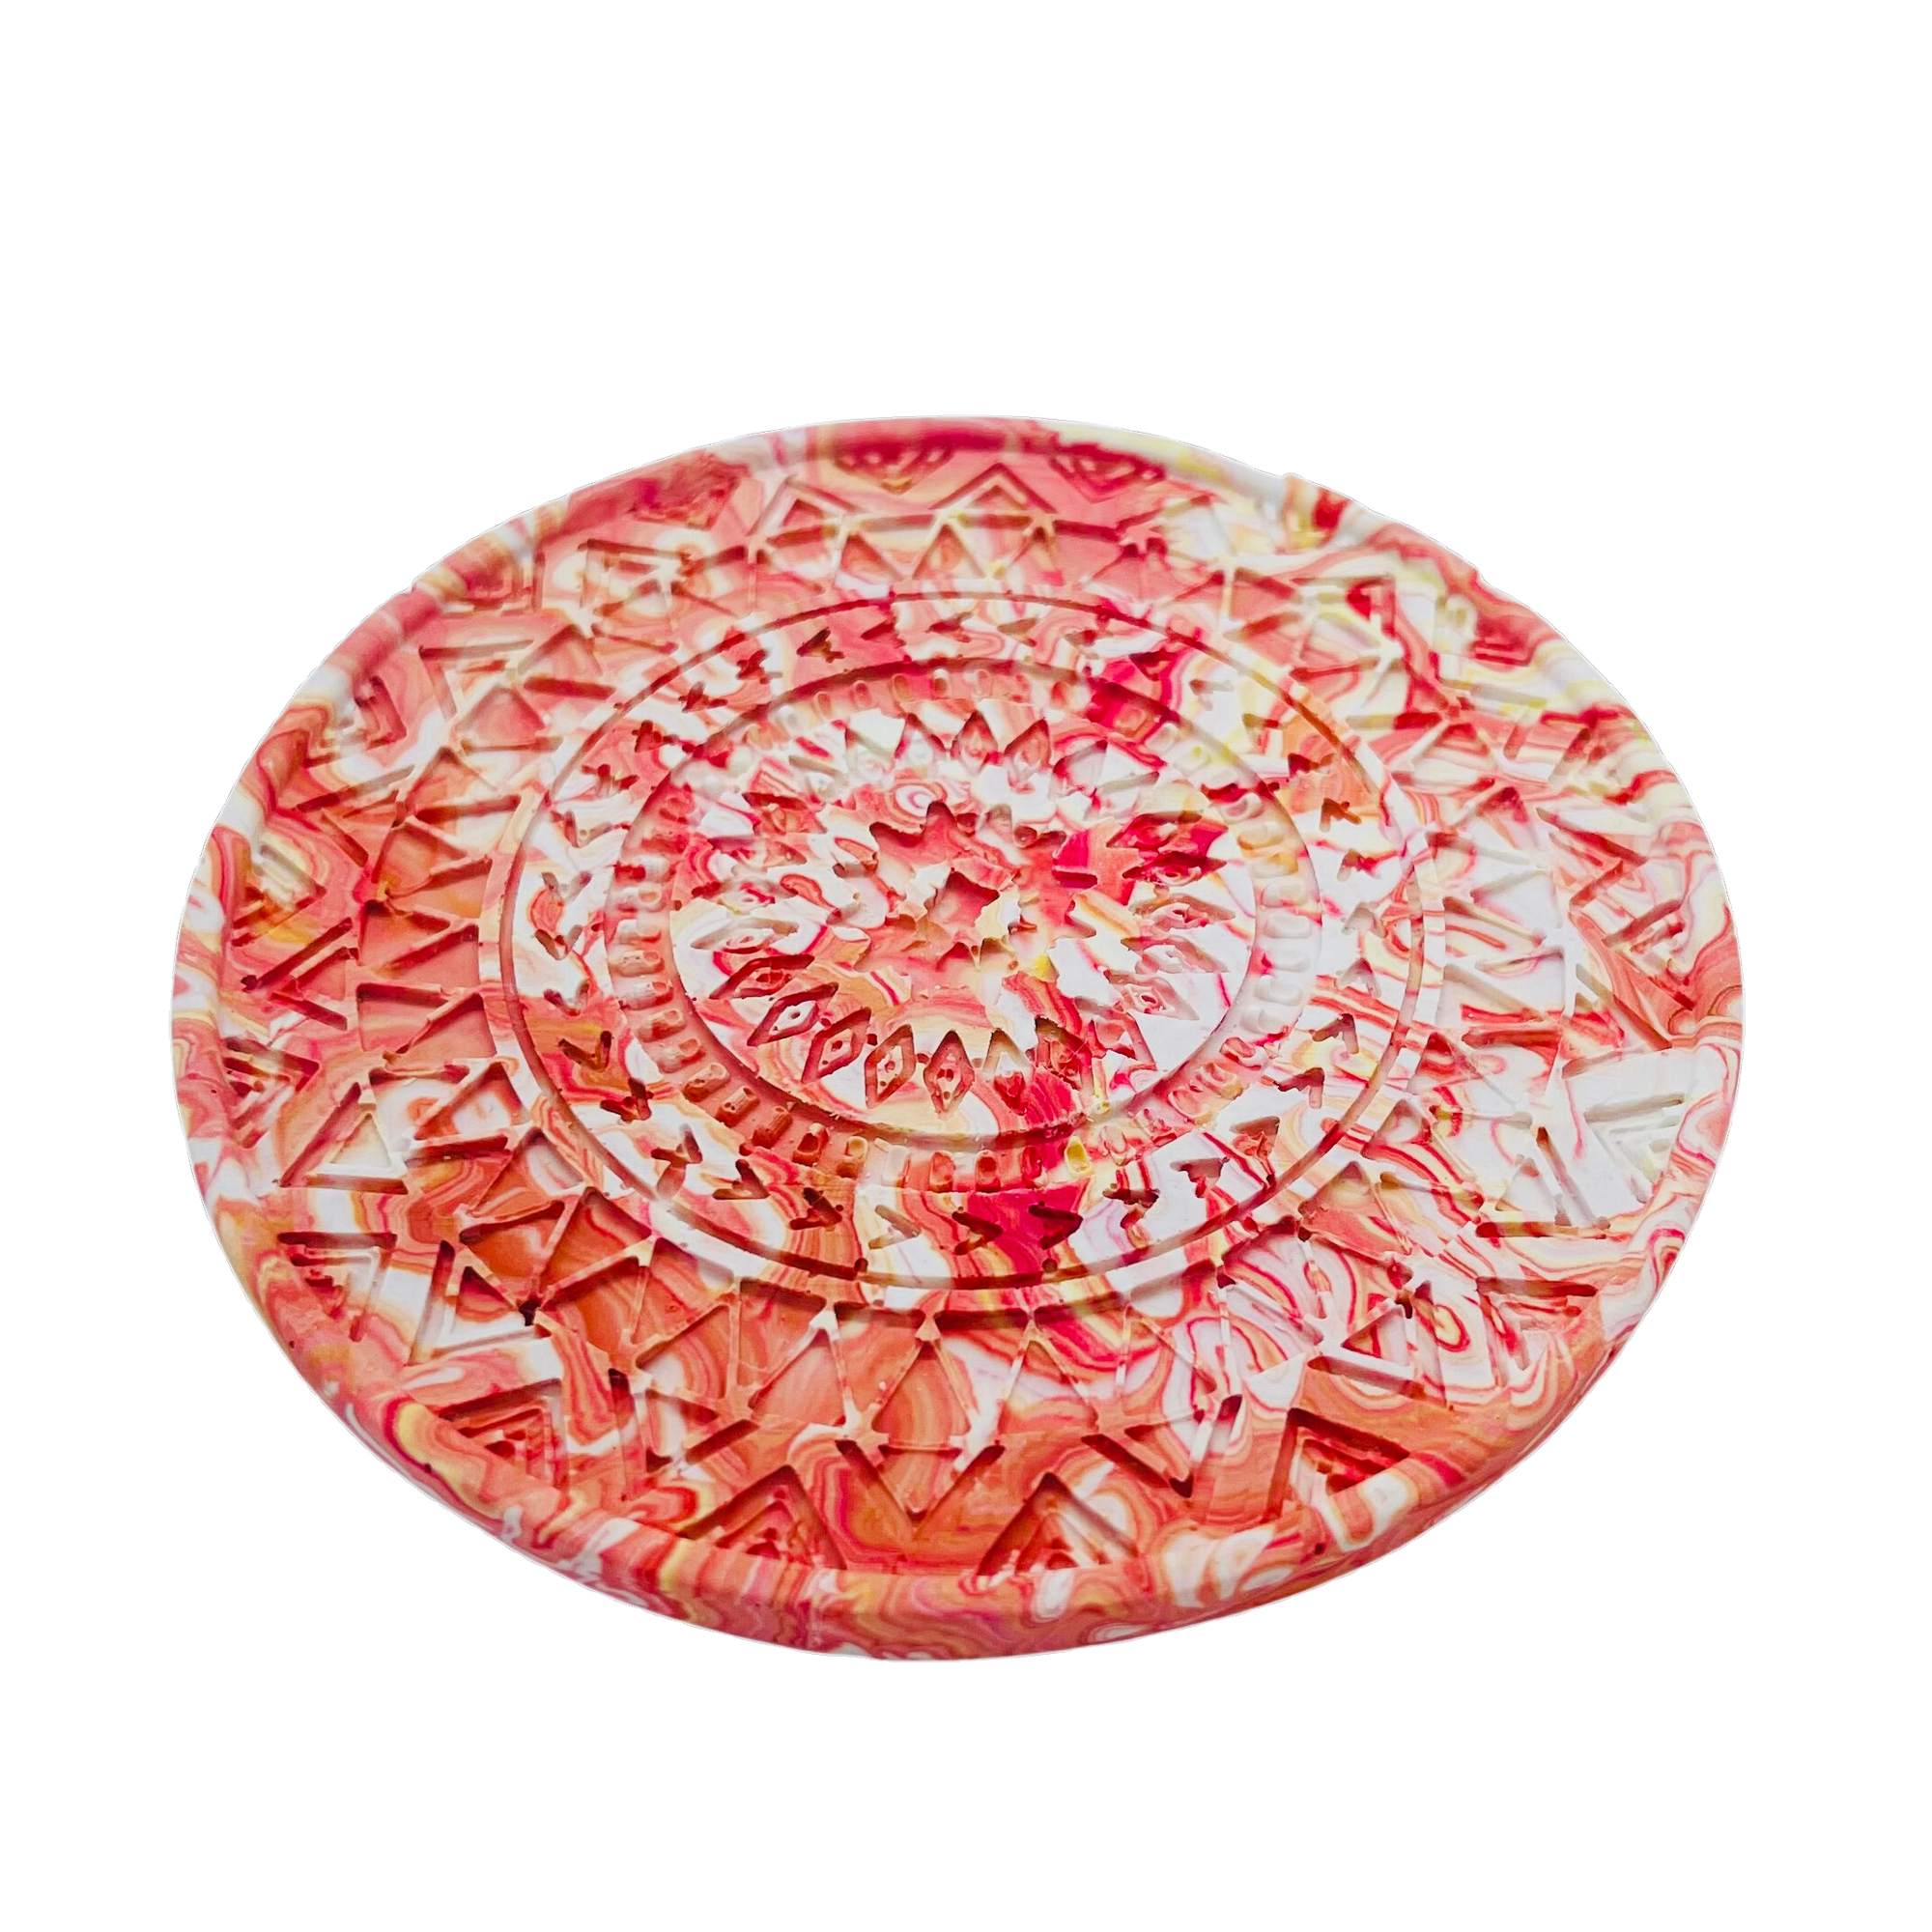 A circular mandela coaster measuring 9.3cm in diameter and 0.8 cm in height marbled with coral pigment.